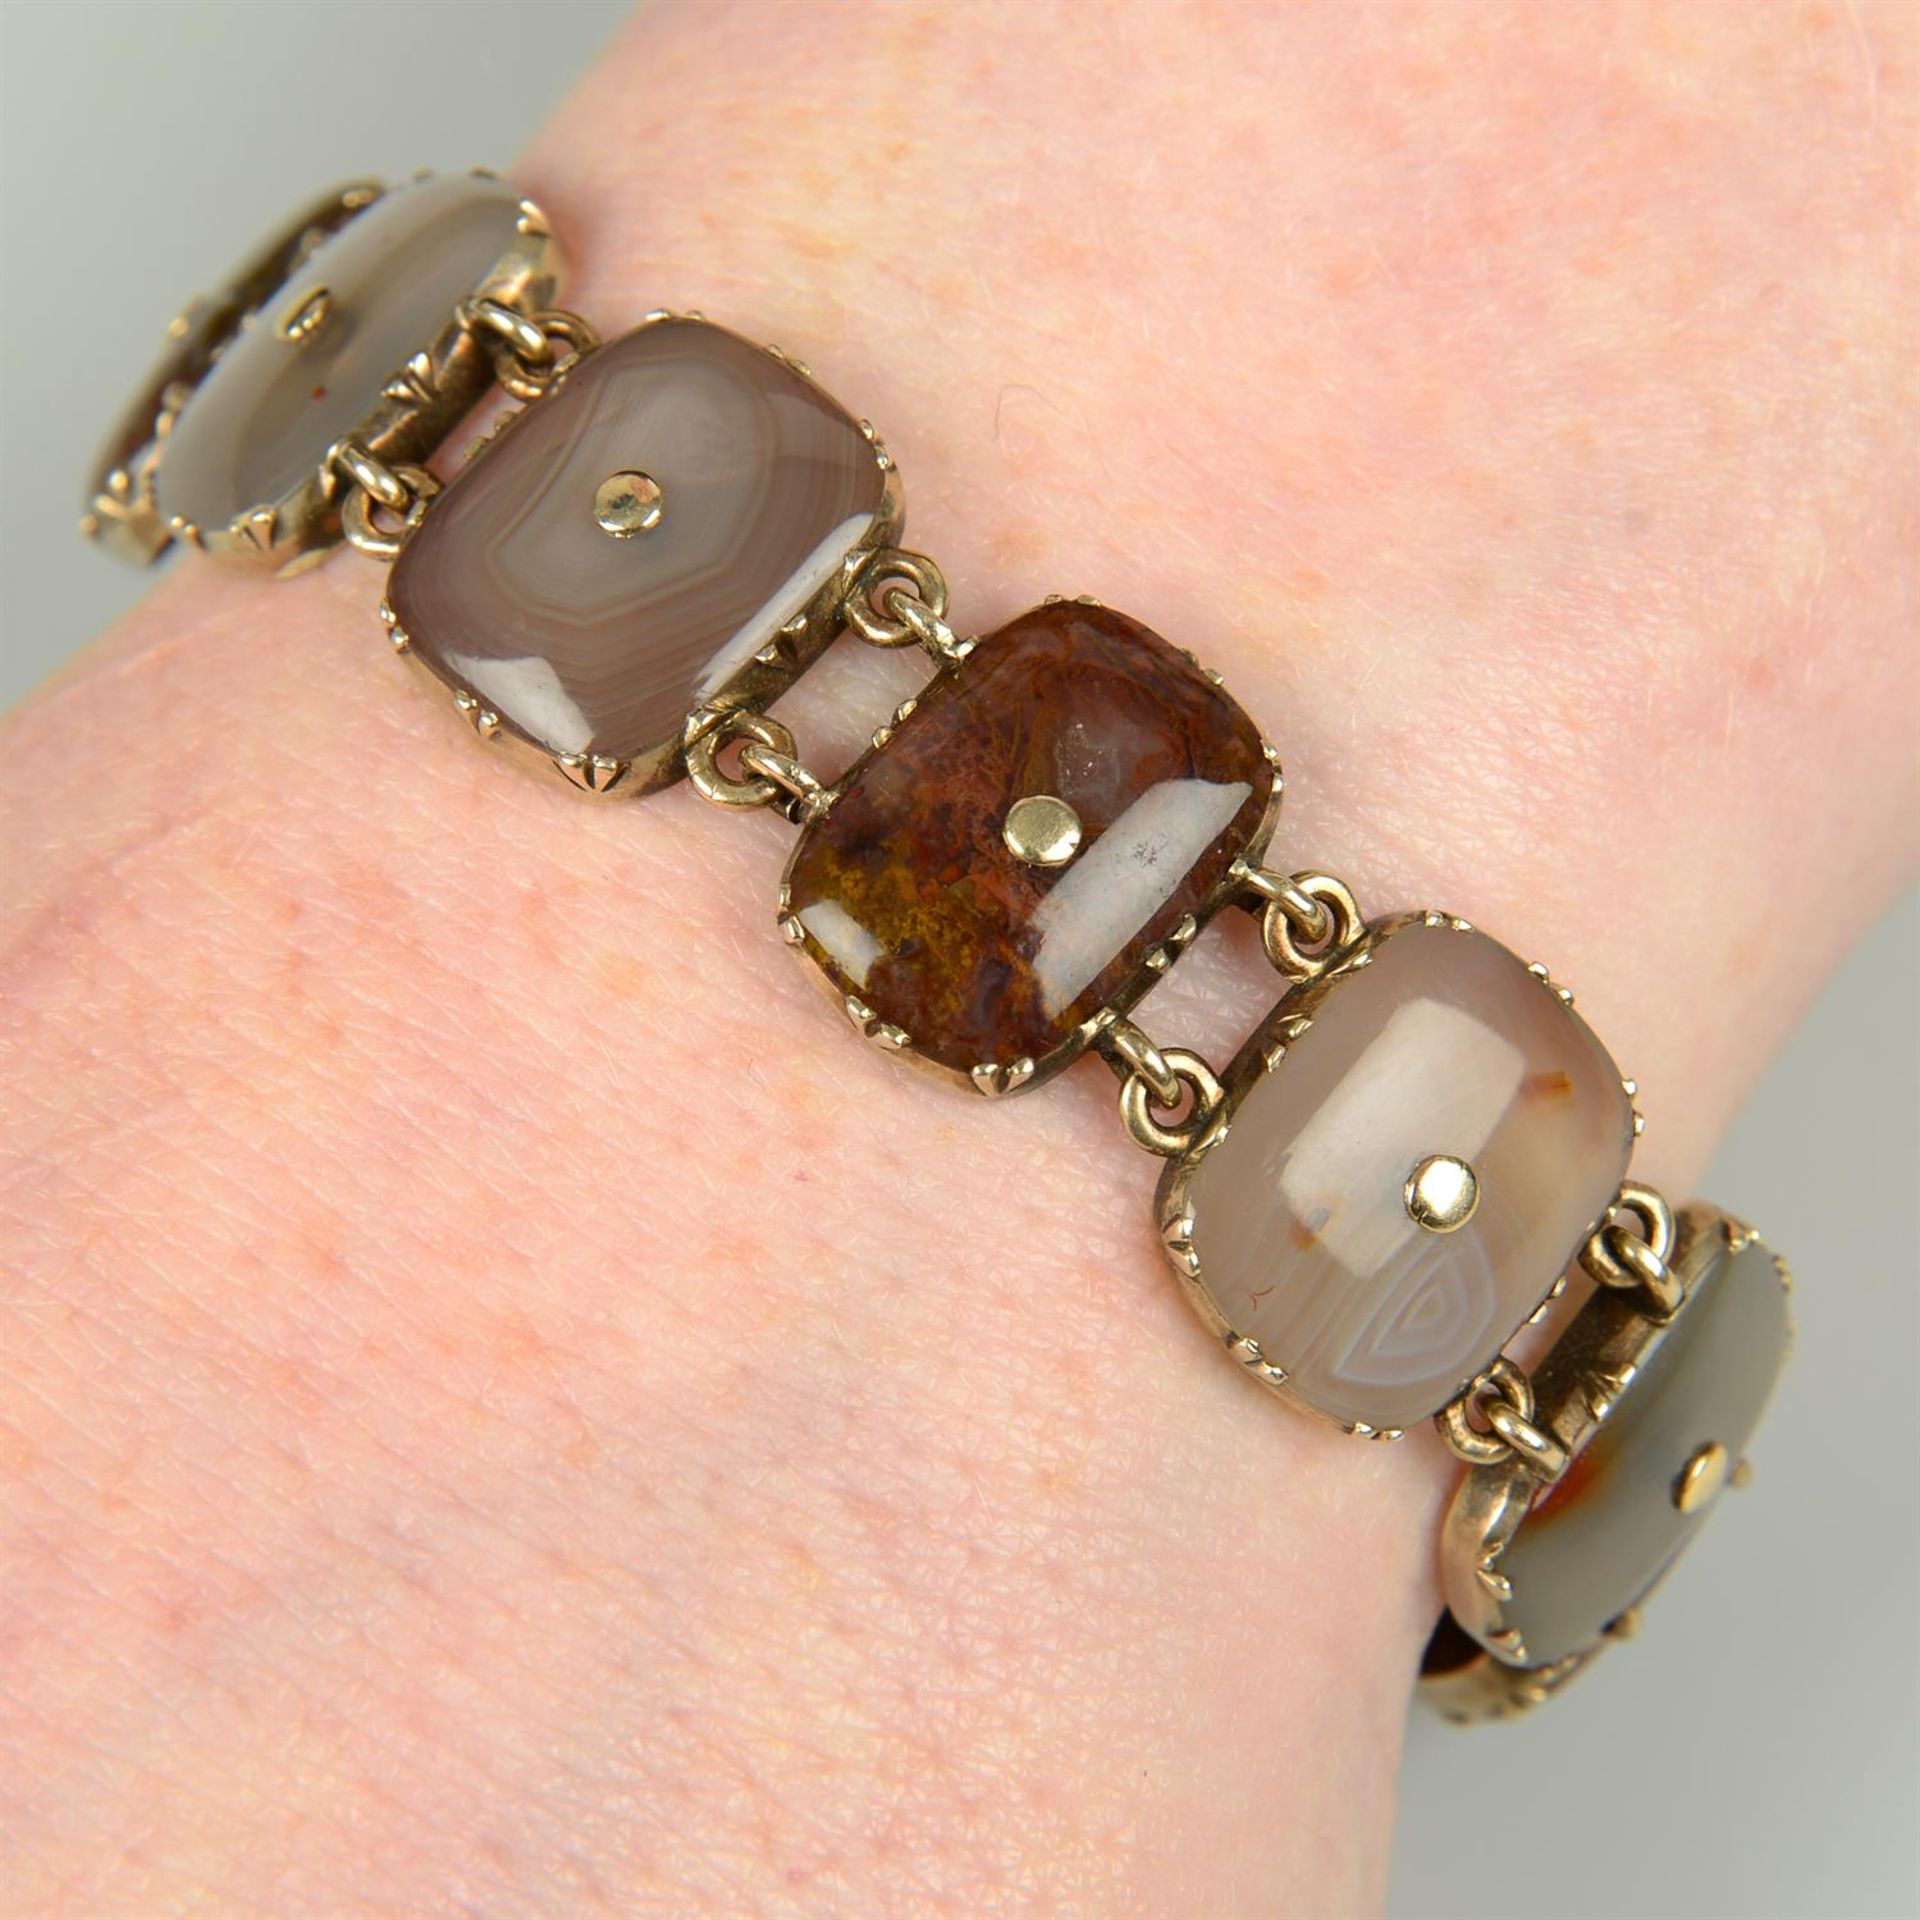 An early to mid 19th century gold Scottish agate bracelet.